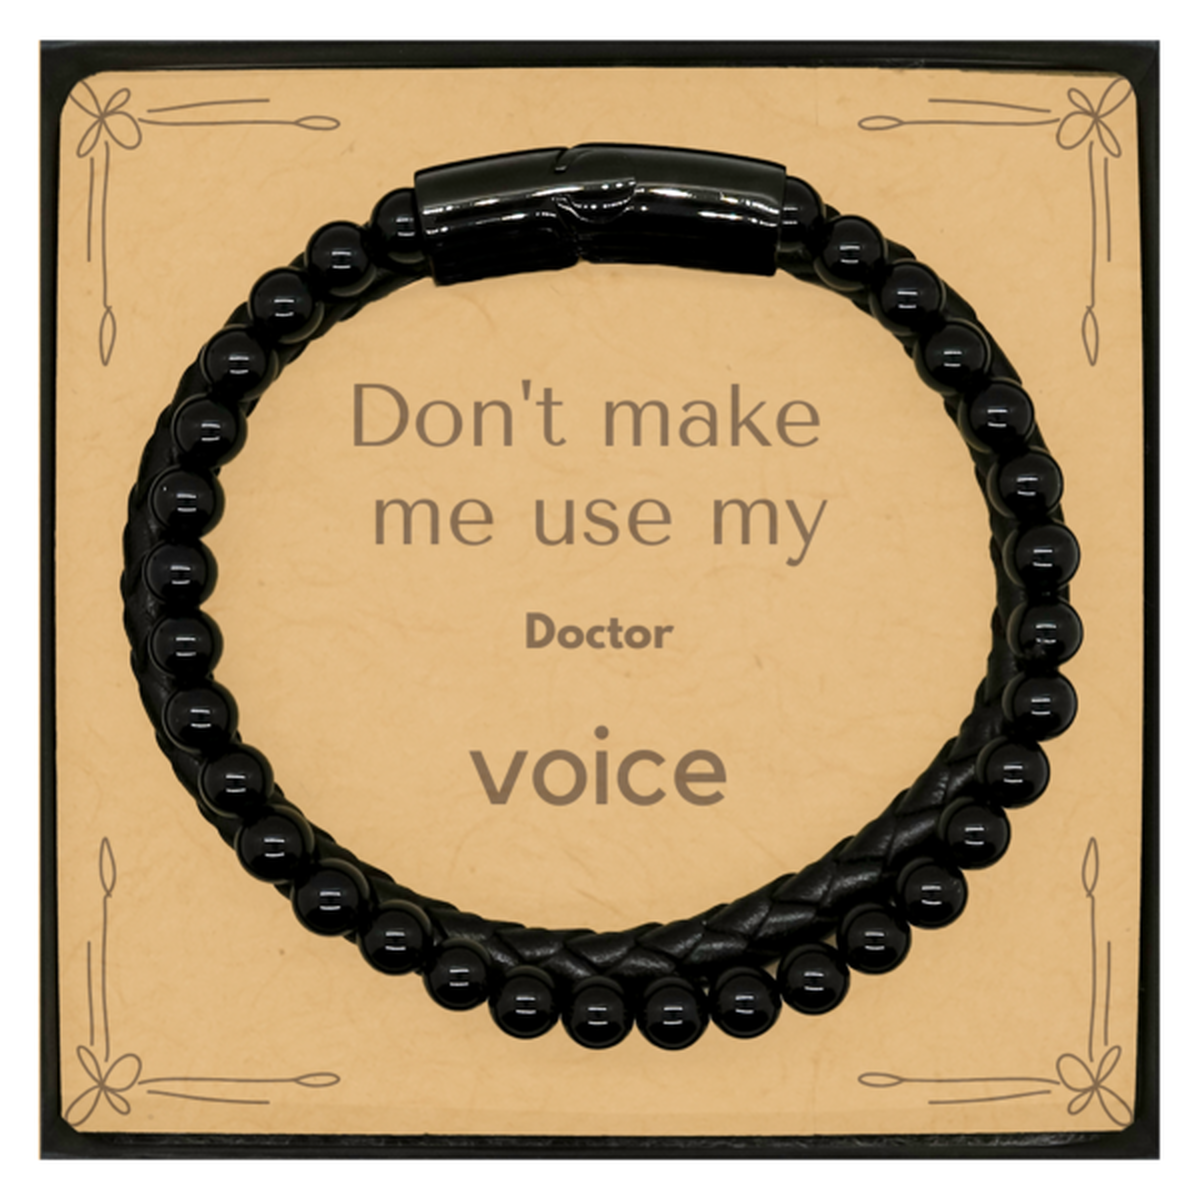 Don't make me use my Doctor voice, Sarcasm Doctor Card Gifts, Christmas Doctor Stone Leather Bracelets Birthday Unique Gifts For Doctor Coworkers, Men, Women, Colleague, Friends